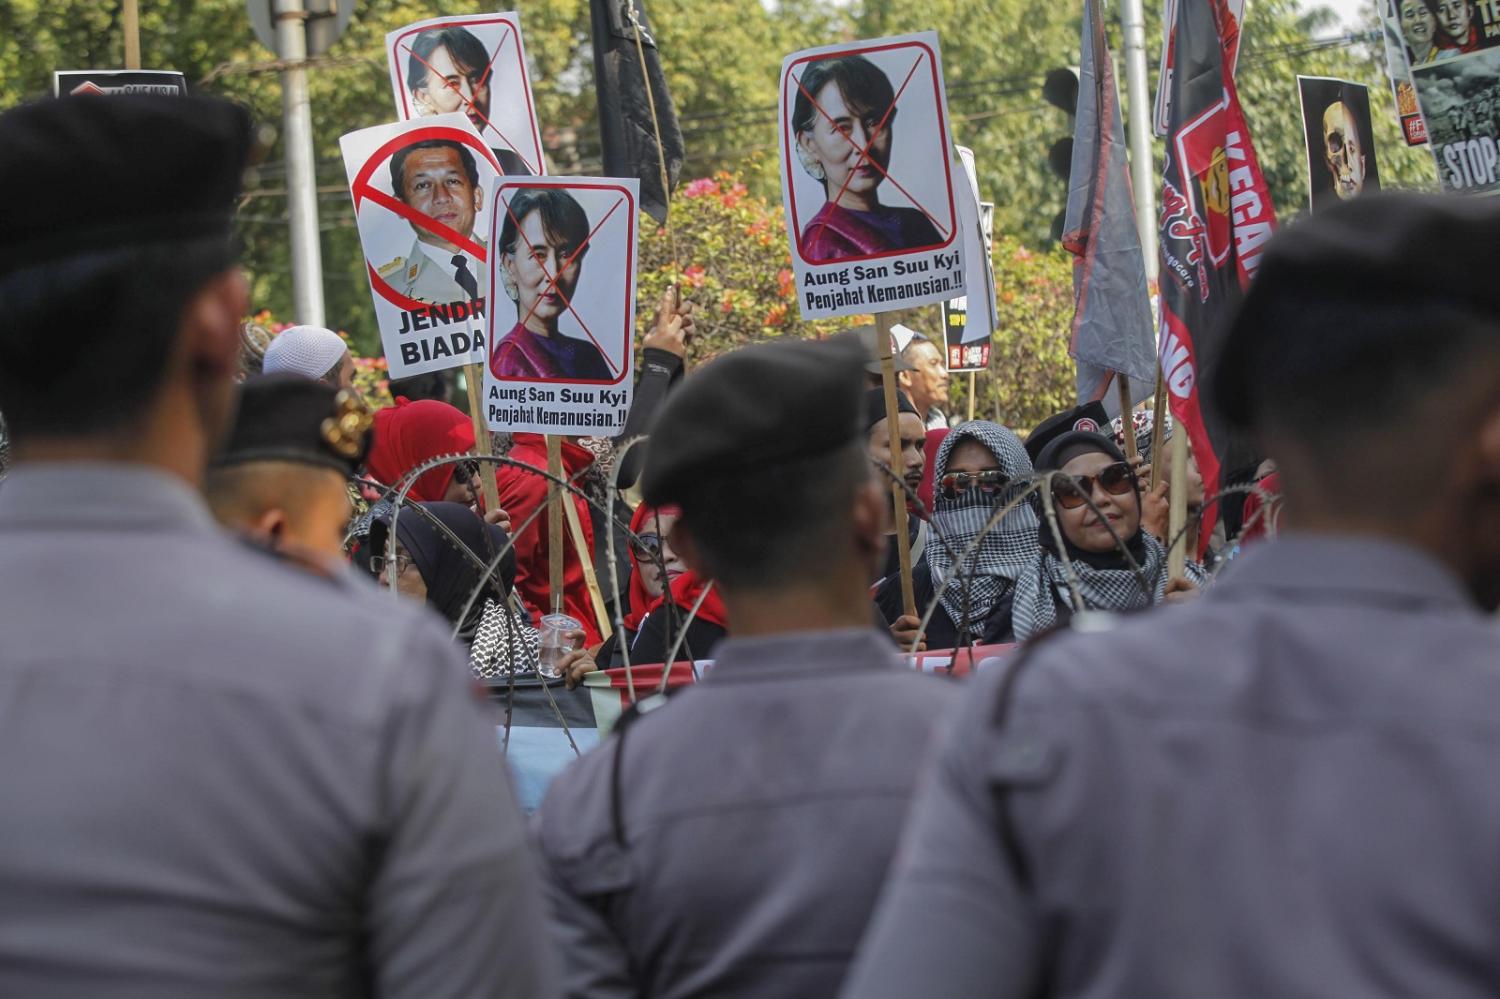 Indonesian Muslim protesters at a protest outside of Myanmar Embassy in Jakarta. (Photo: Agoes Rudianto/Anadolu Agency/Getty Images)